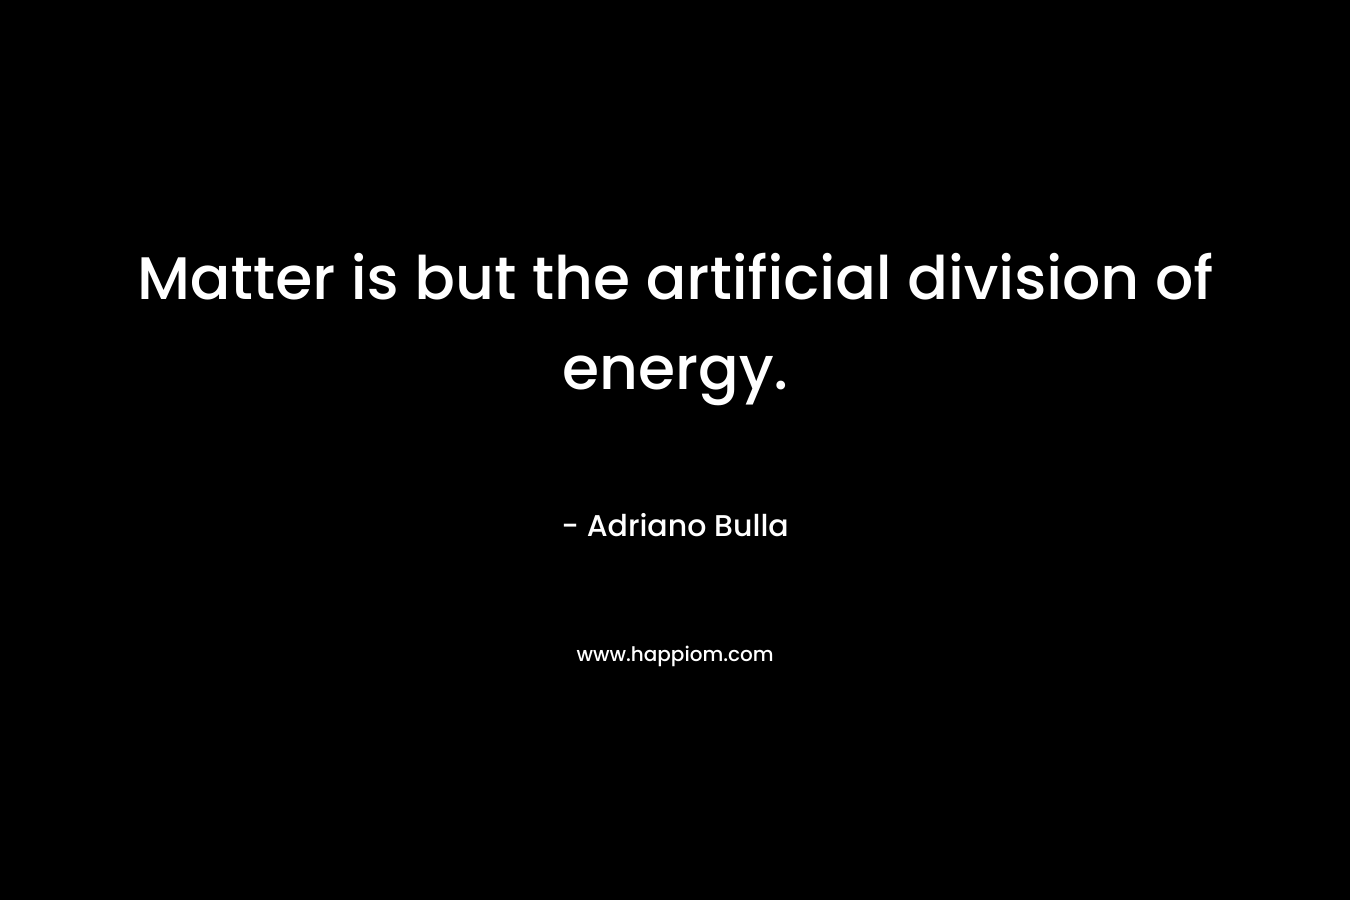 Matter is but the artificial division of energy.